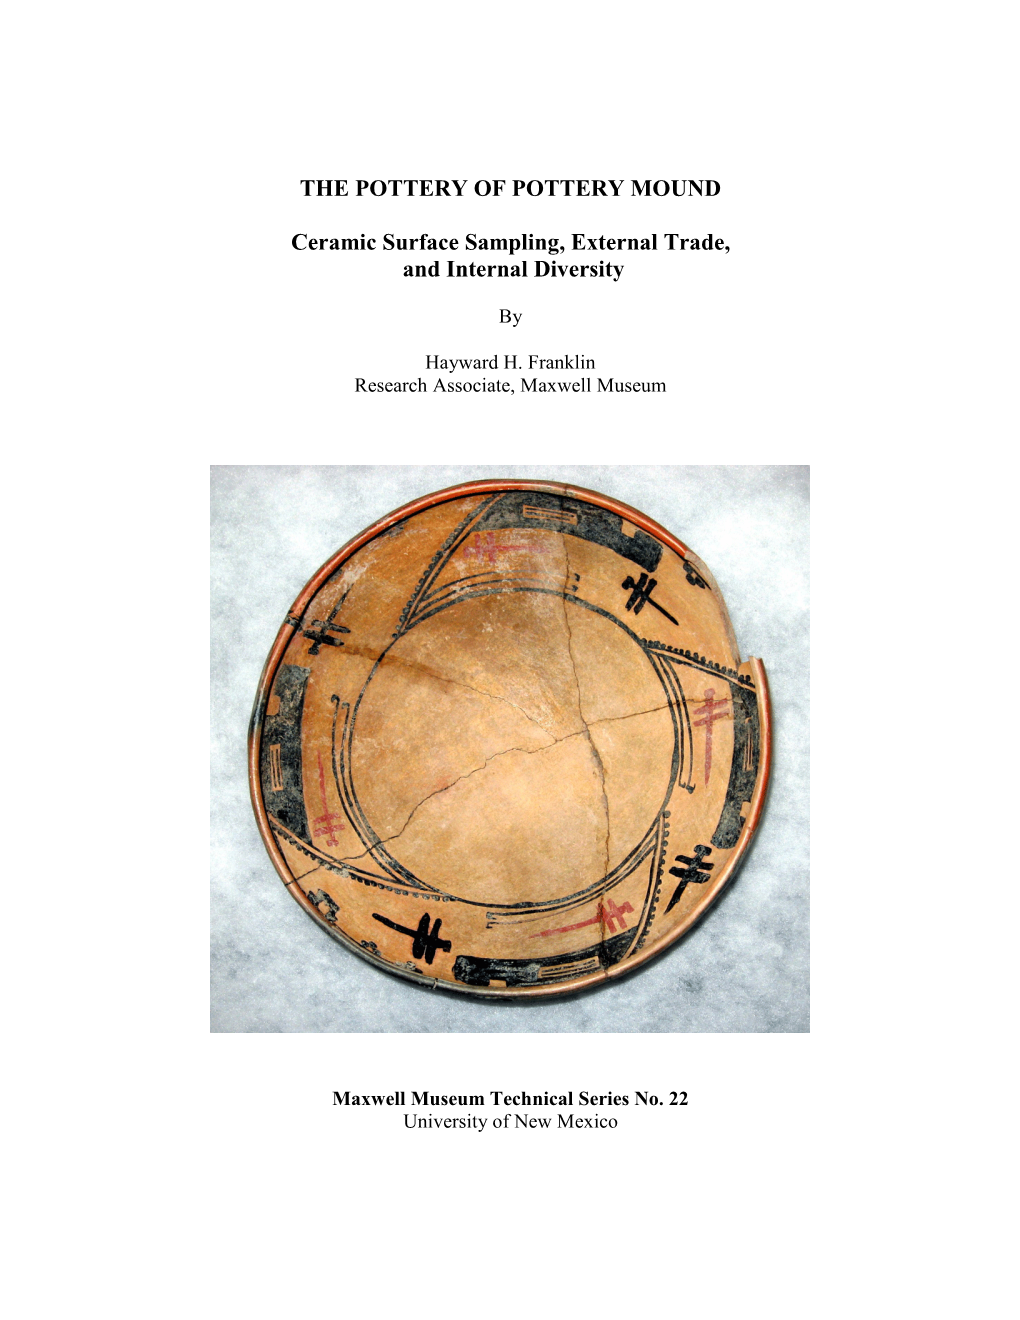 The Pottery of Pottery Mound: Ceramic Surface Sampling, External Trade, and Internal Diversity